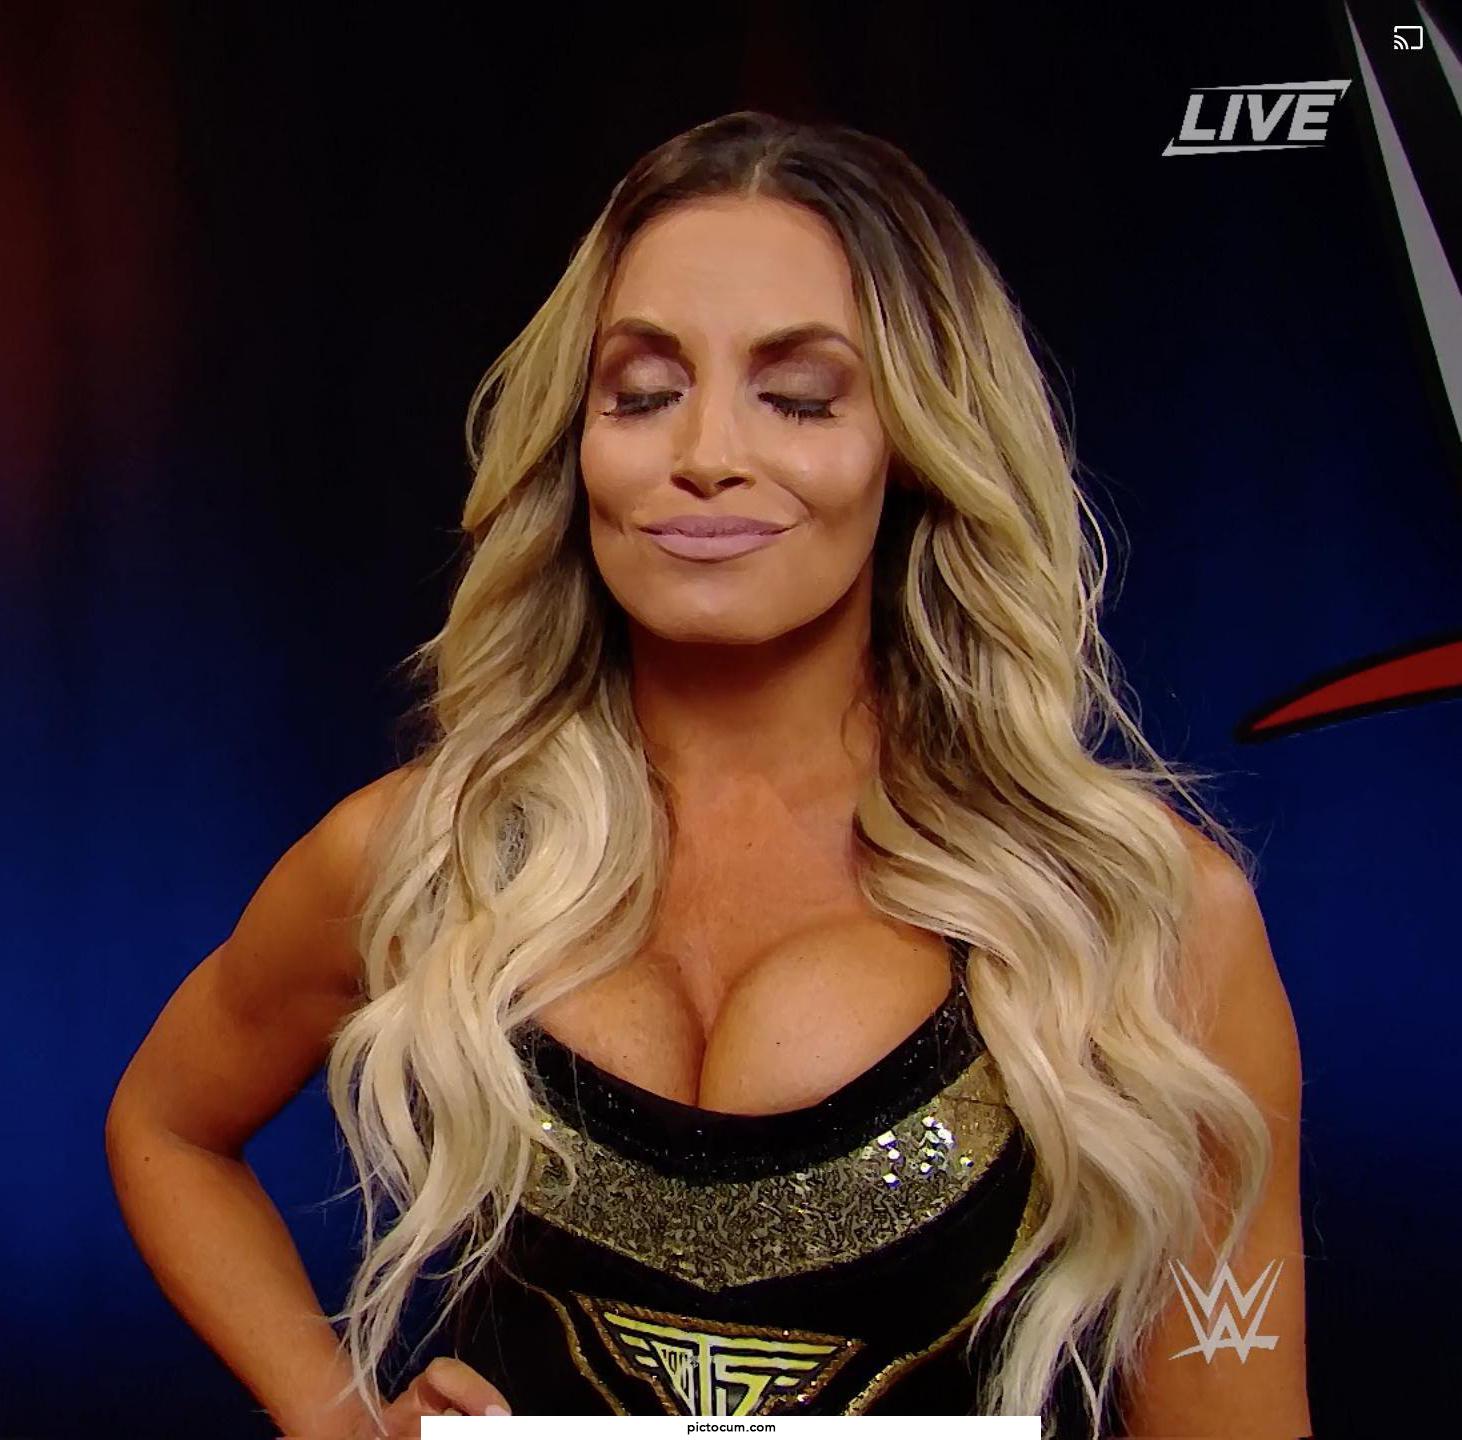 Good luck surviving a titjob from Trish Stratus